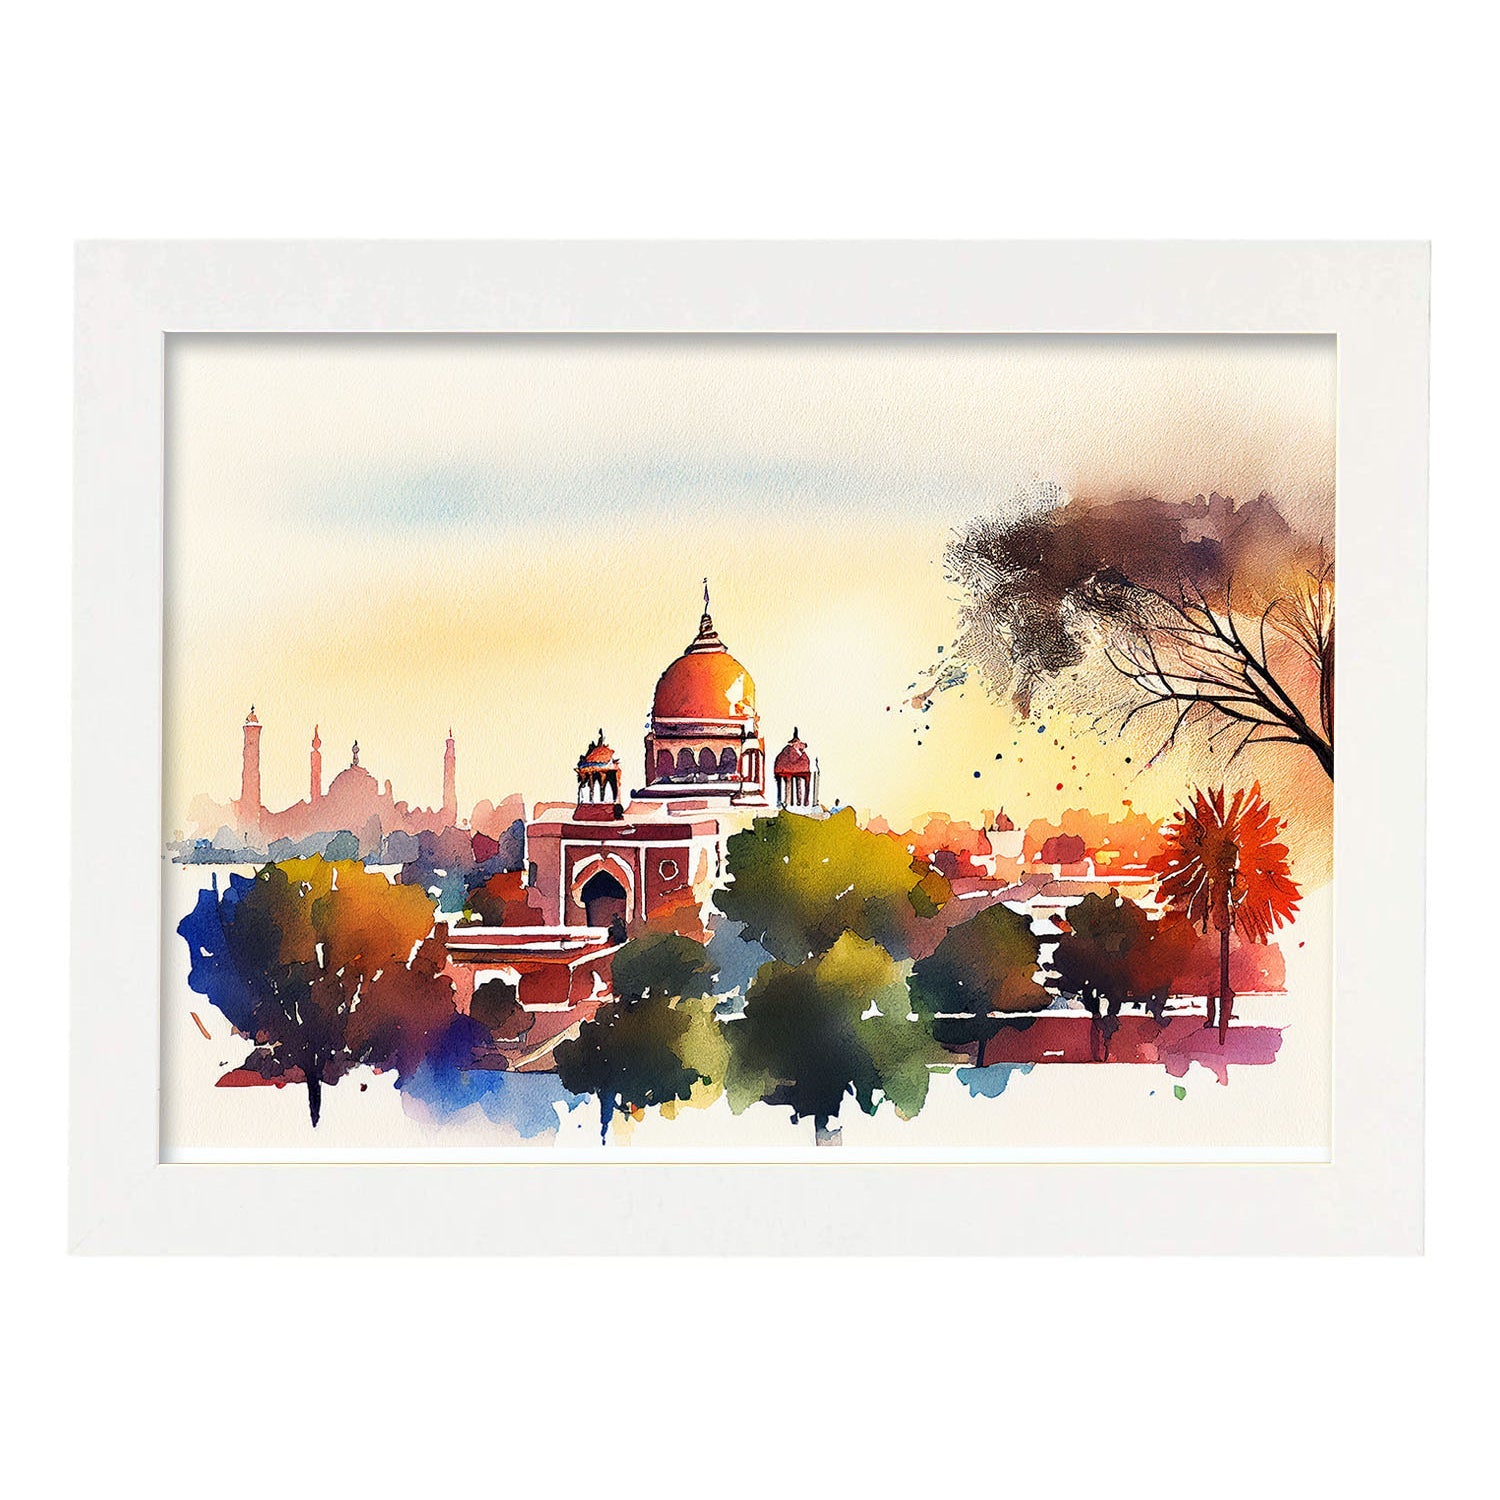 Nacnic watercolor of a skyline of the city of New Delhi. Aesthetic Wall Art Prints for Bedroom or Living Room Design.-Artwork-Nacnic-A4-Marco Blanco-Nacnic Estudio SL